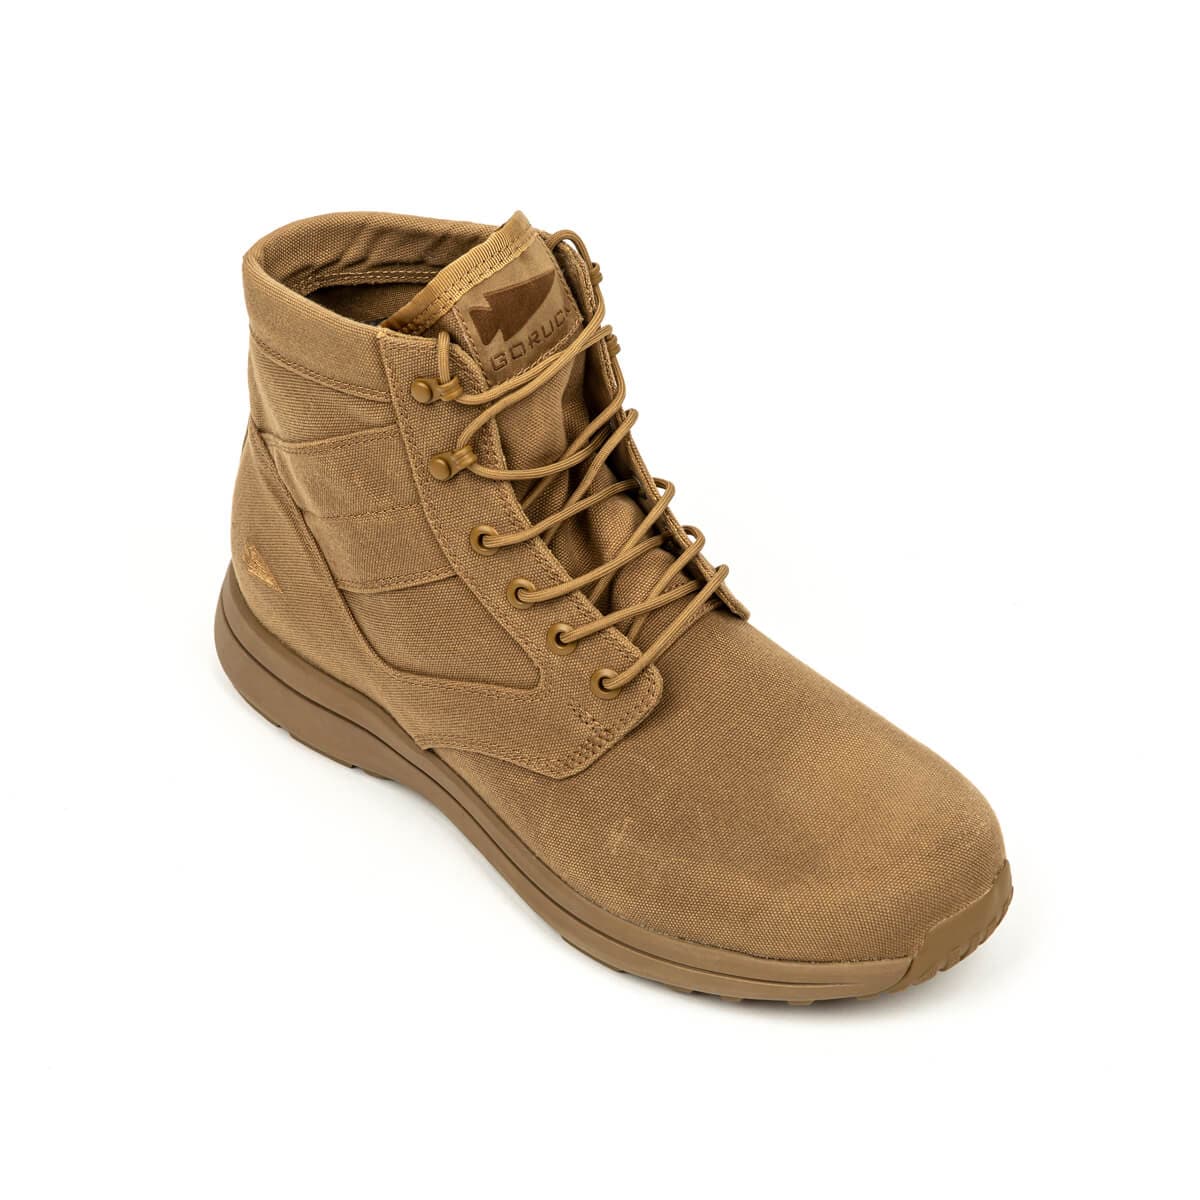 Jedburgh Rucking Boots - Mid Top - Coyote